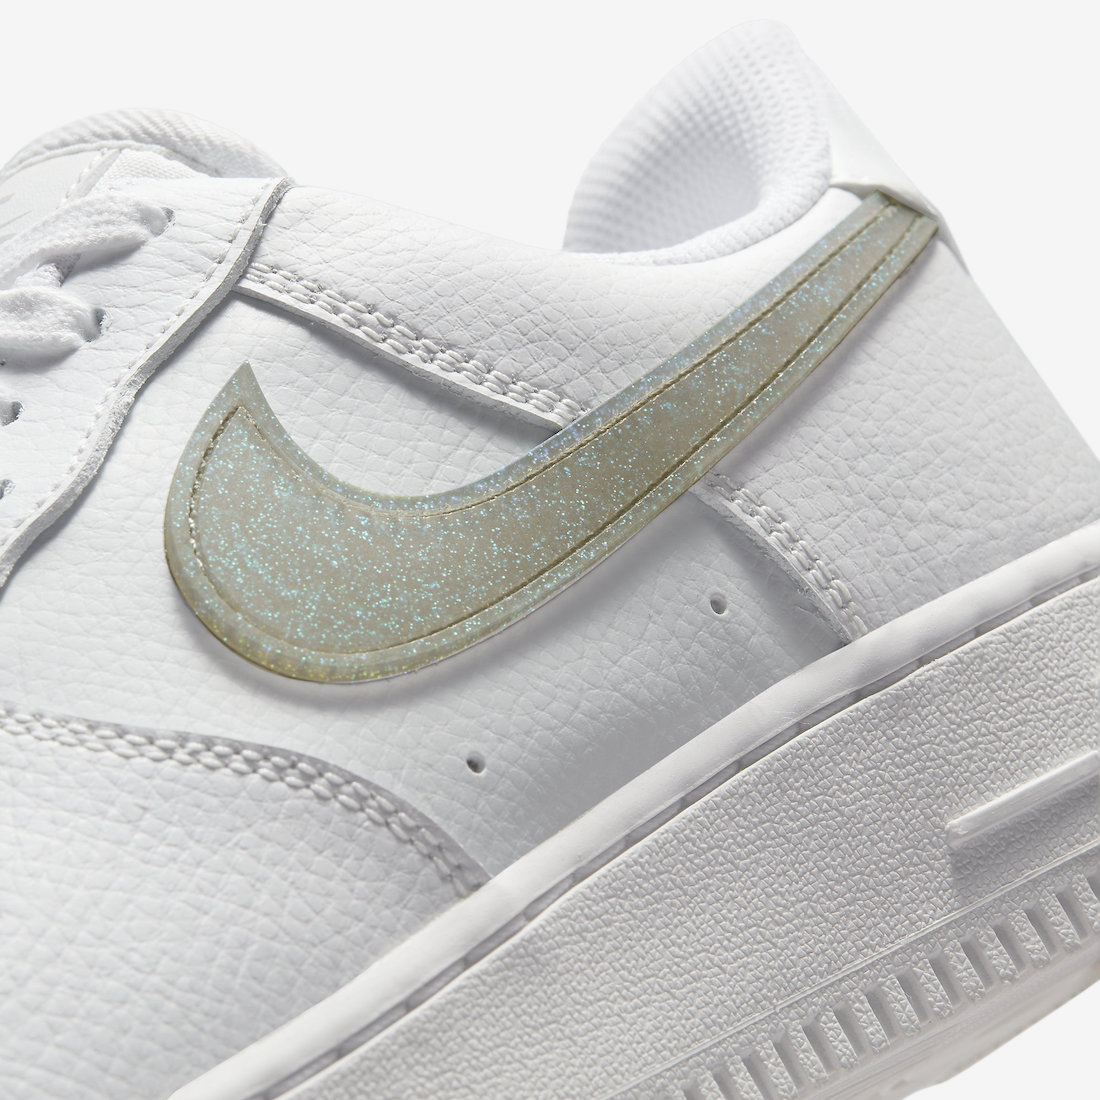 Nike Air Force 1 Low Glitter Swoosh DH4407-101 Release Date